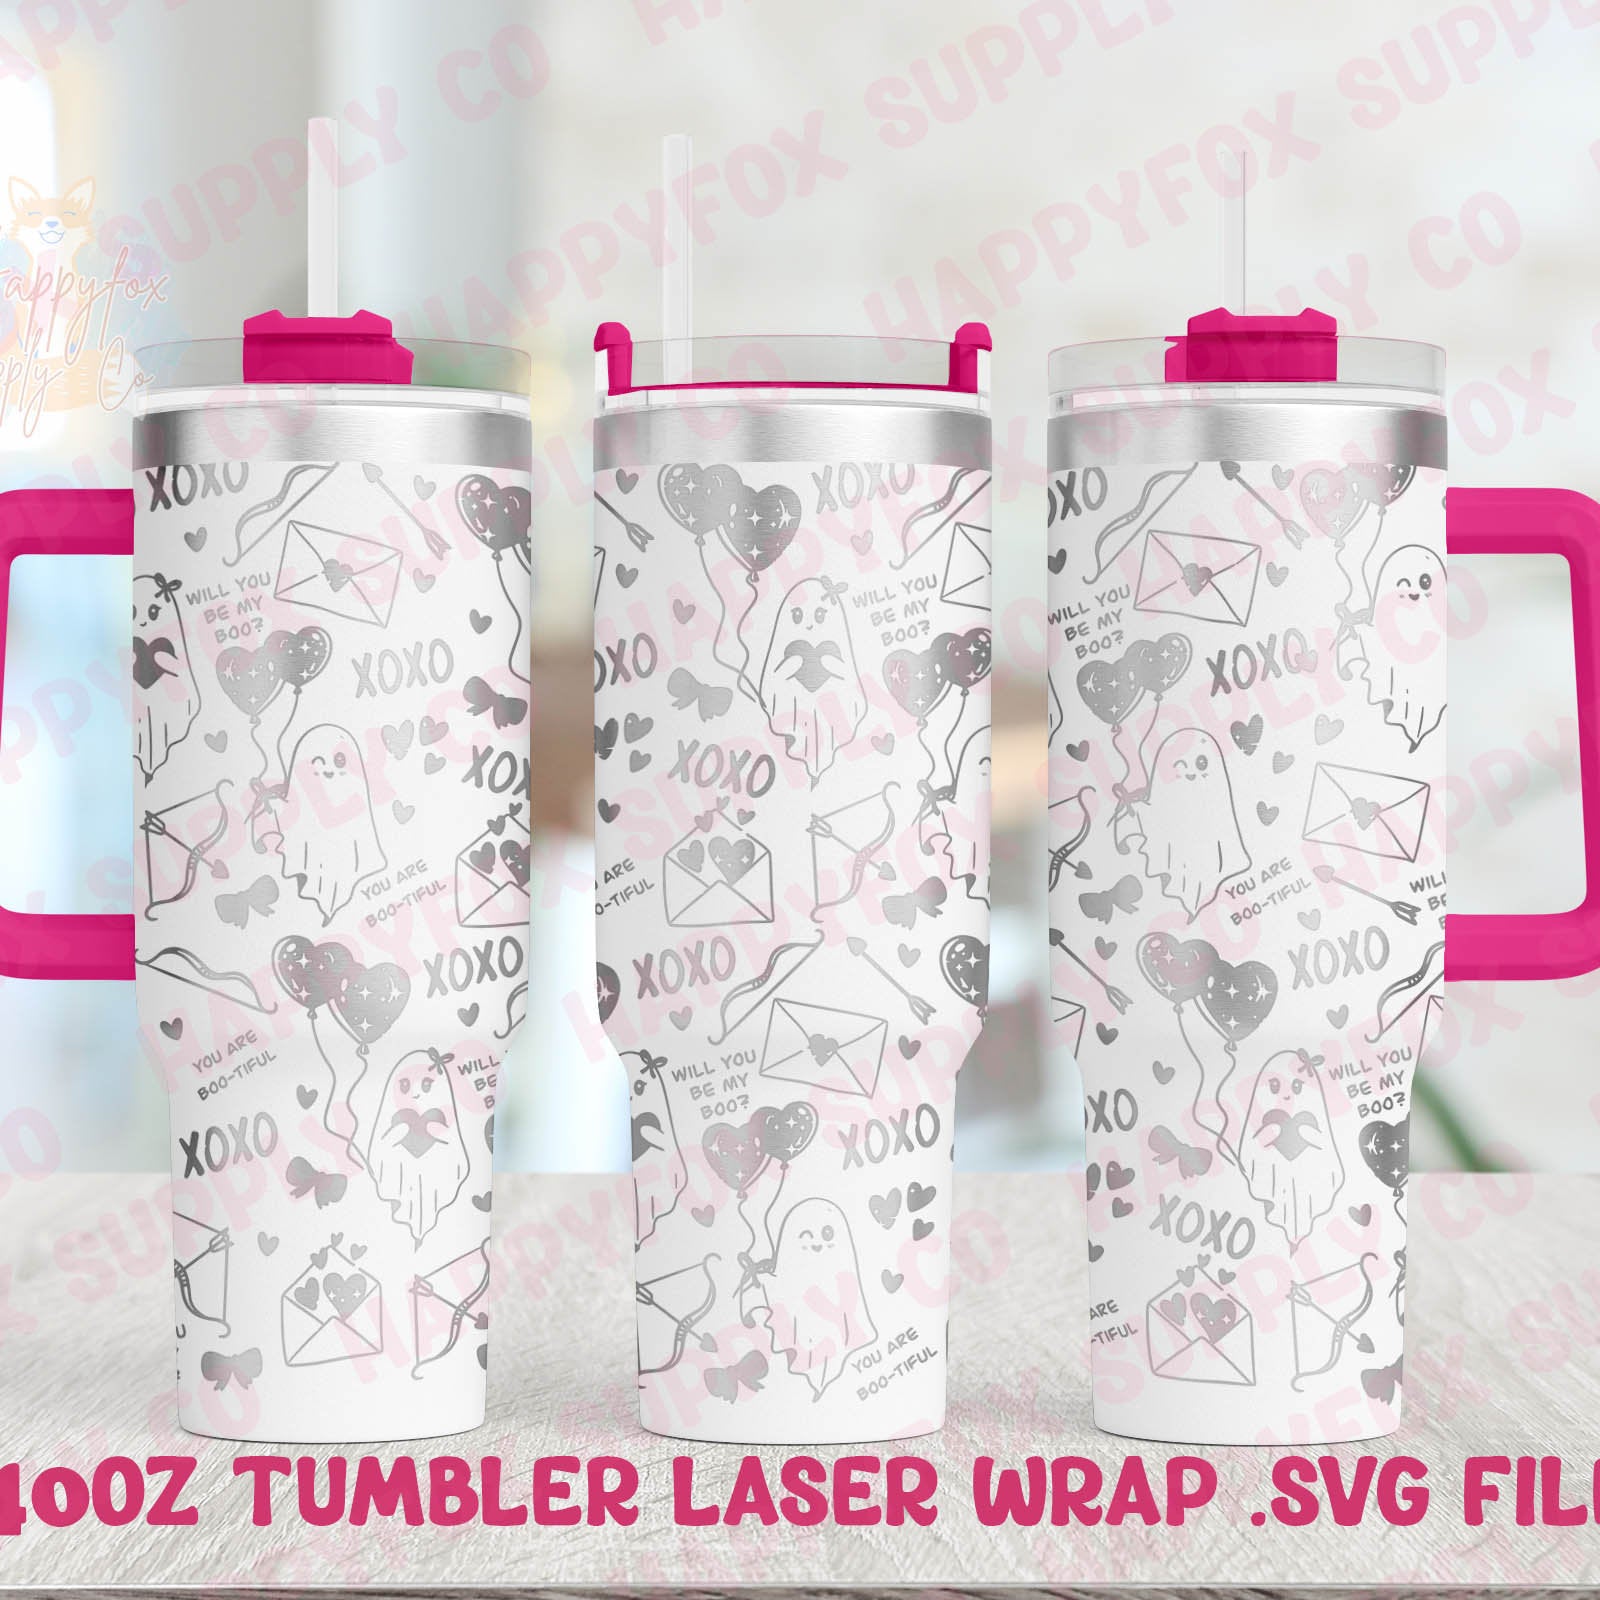 40oz Engraving .SVG File for Lasers Laser Engraved Tumbler Wrap Be My Boo Valentine Ghosts Spooky Valentine Cute XOXO .SVG Tumbler Wrap